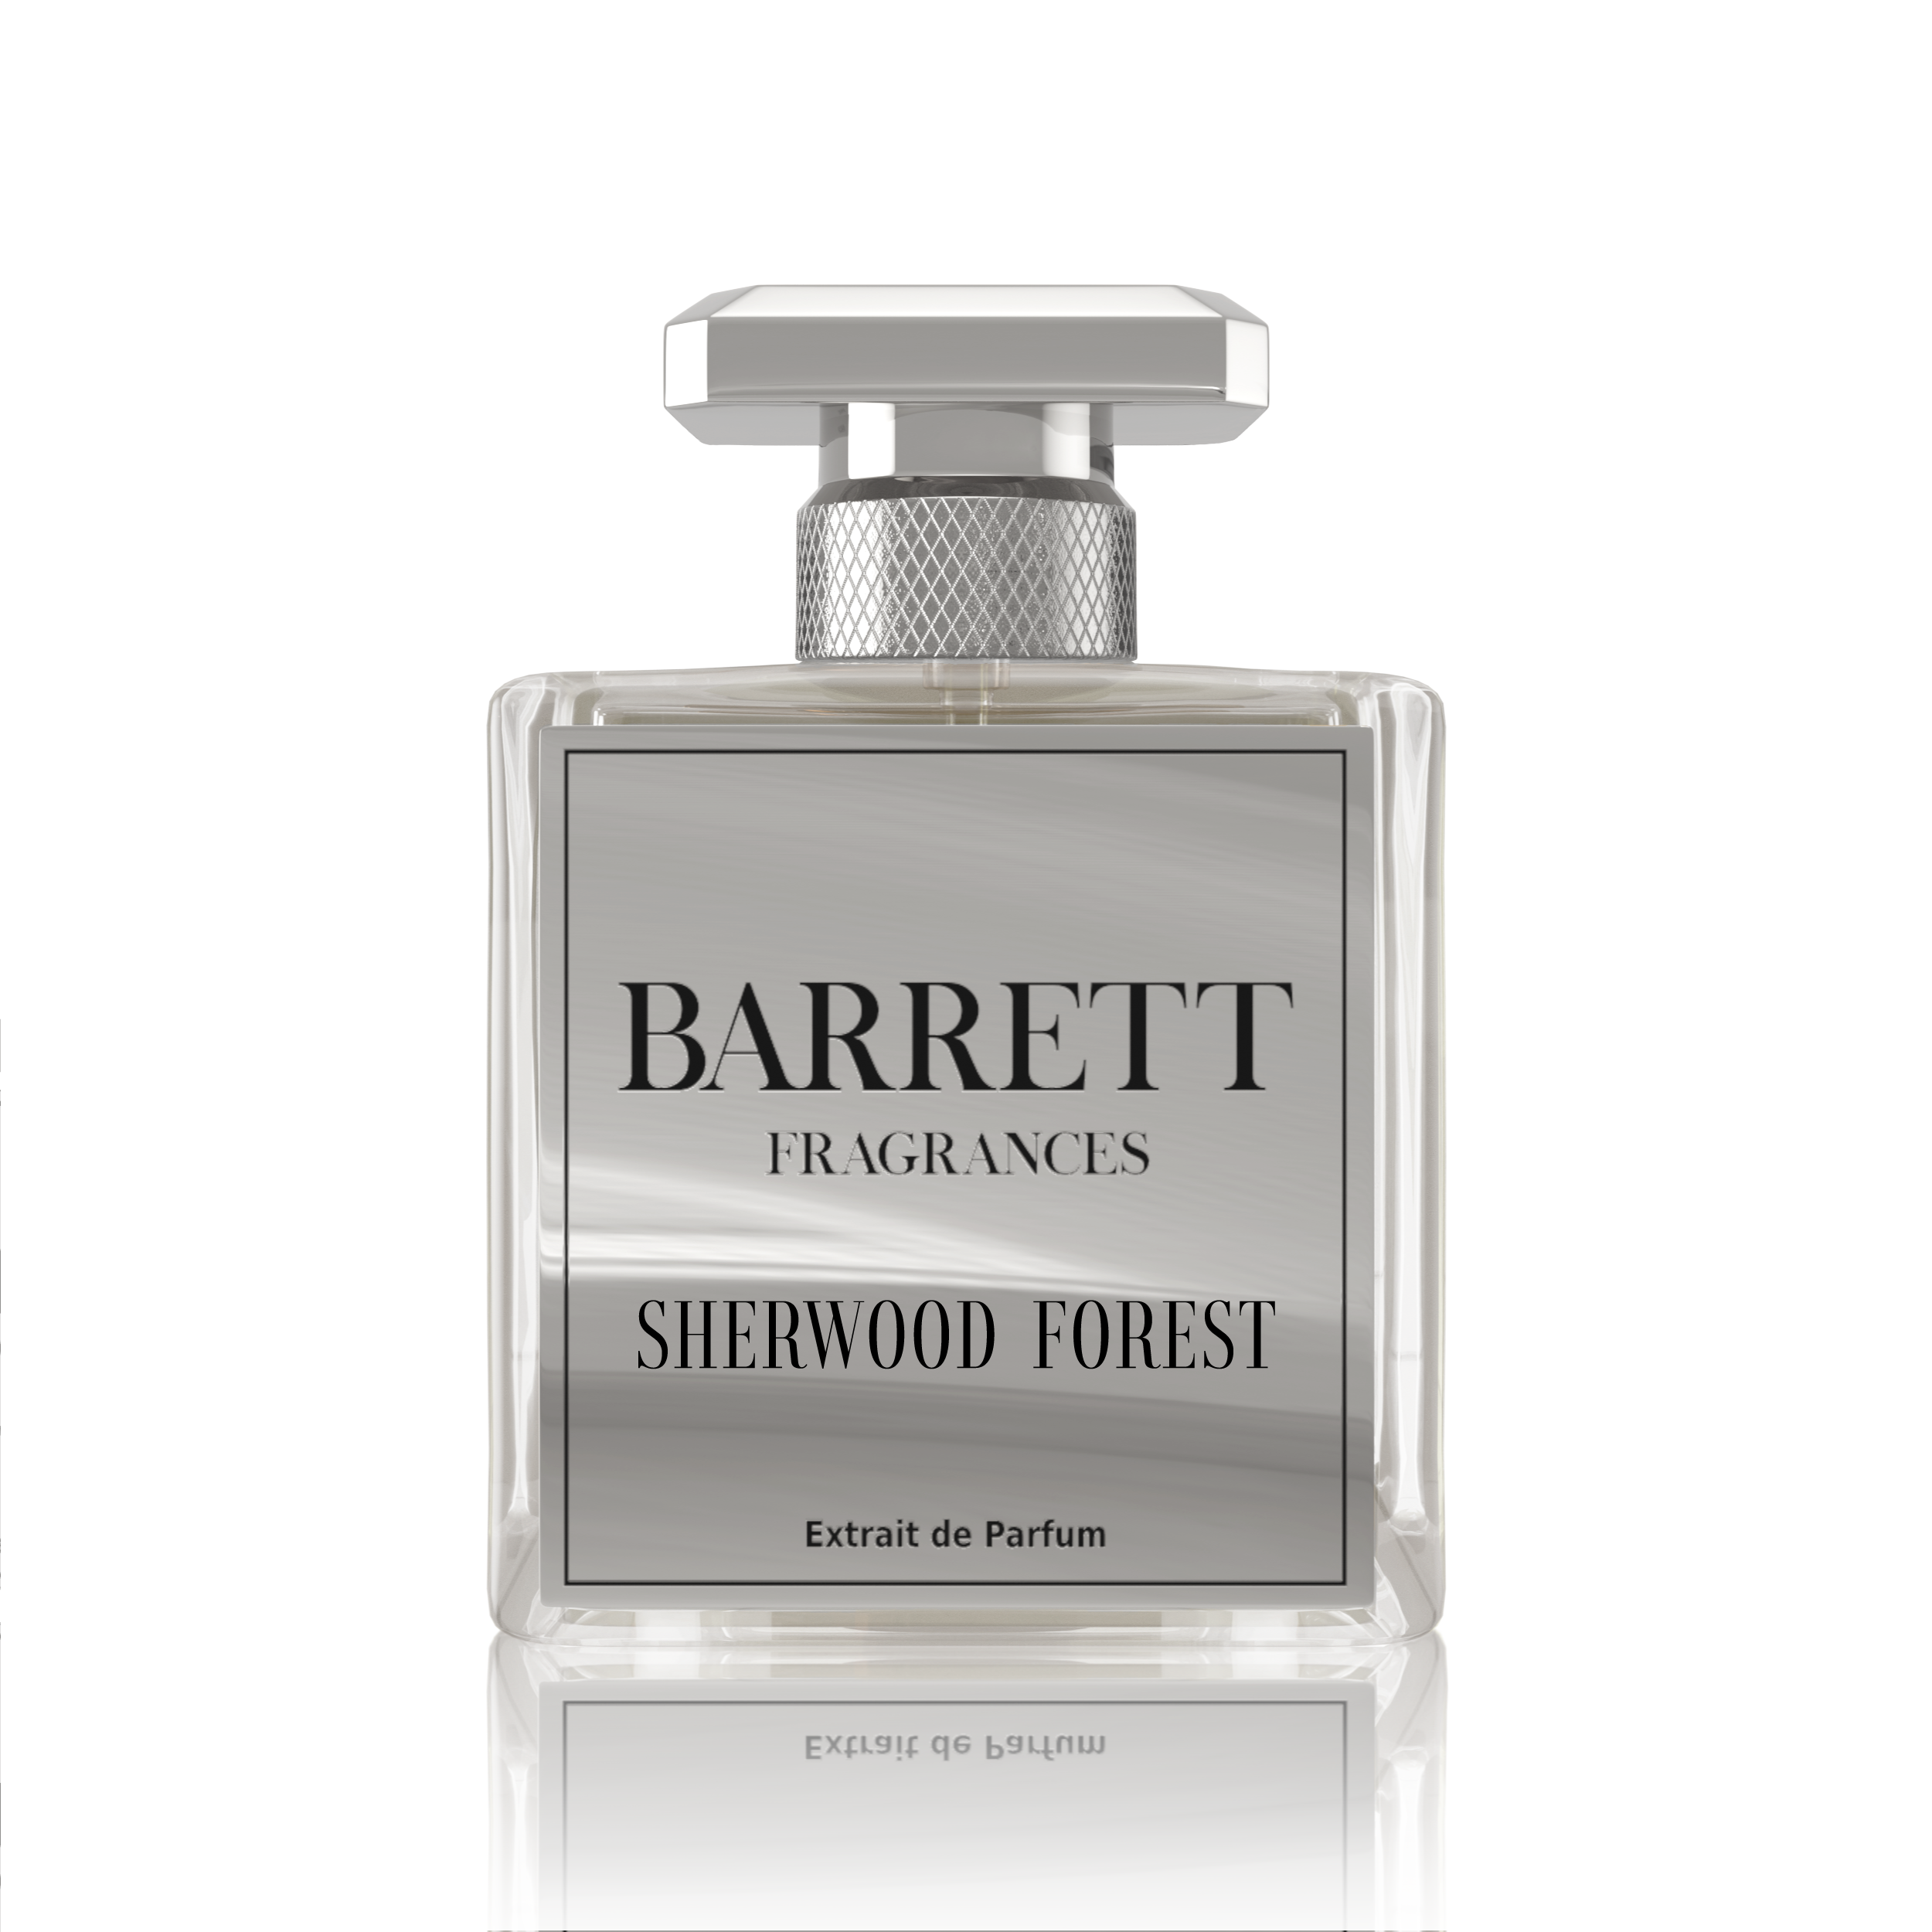 Sherwood Forest inspired by Spice And Wood